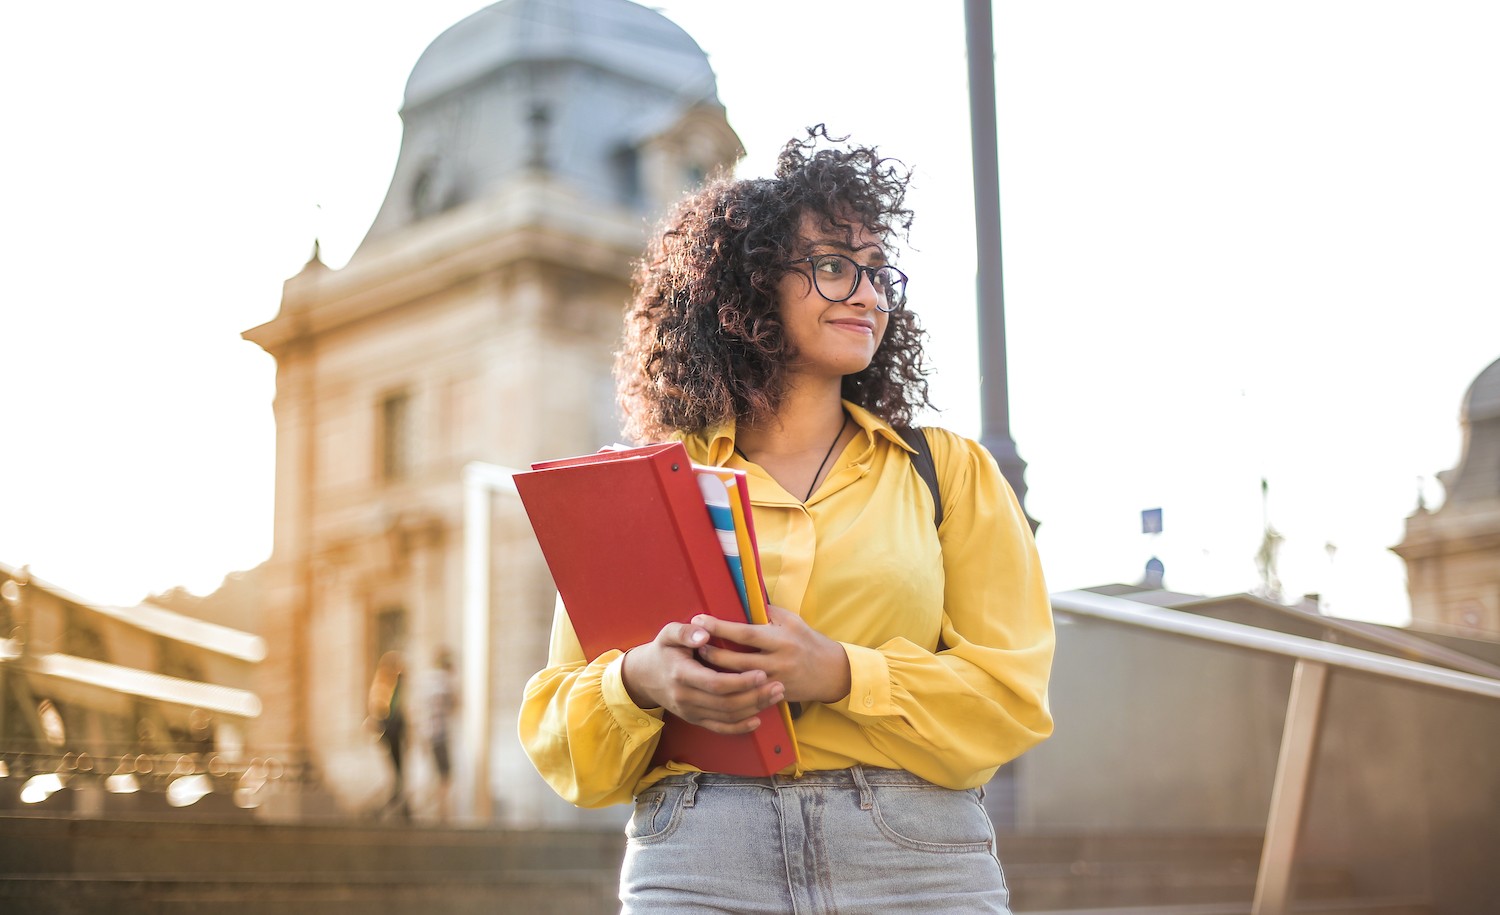 A woman smiles in front of a college building for an article about being an introvert in college.